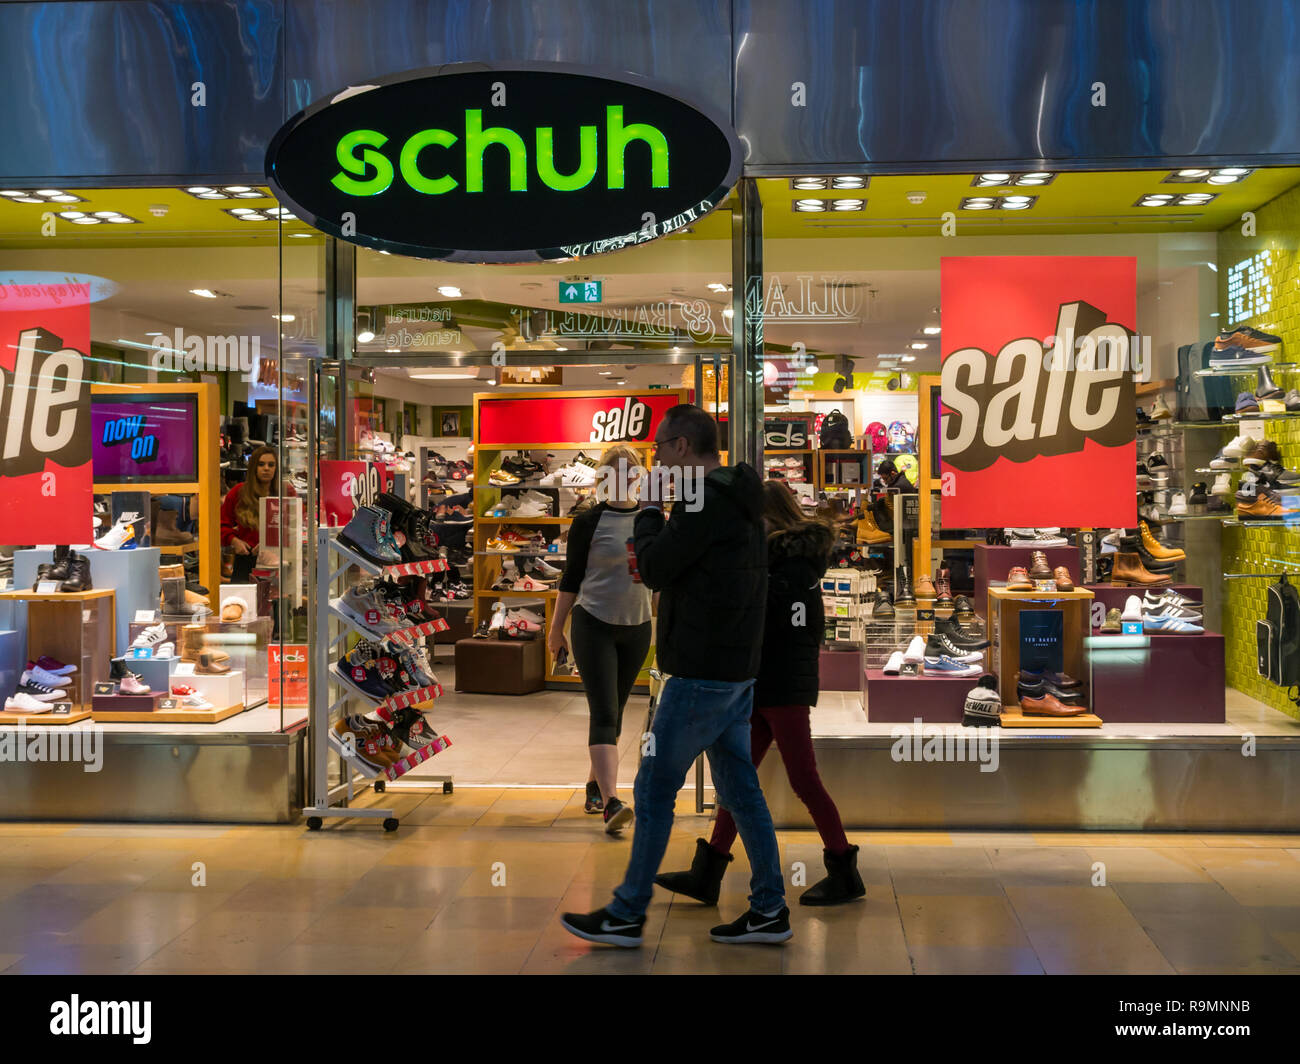 Ocean Terminal shopping centre, Leith, Edinburgh, Scotland, United Kingdom,  26th December 2018. Schuh shop front advertising a Boxing Day sale with  shoppers walking past the window display Stock Photo - Alamy